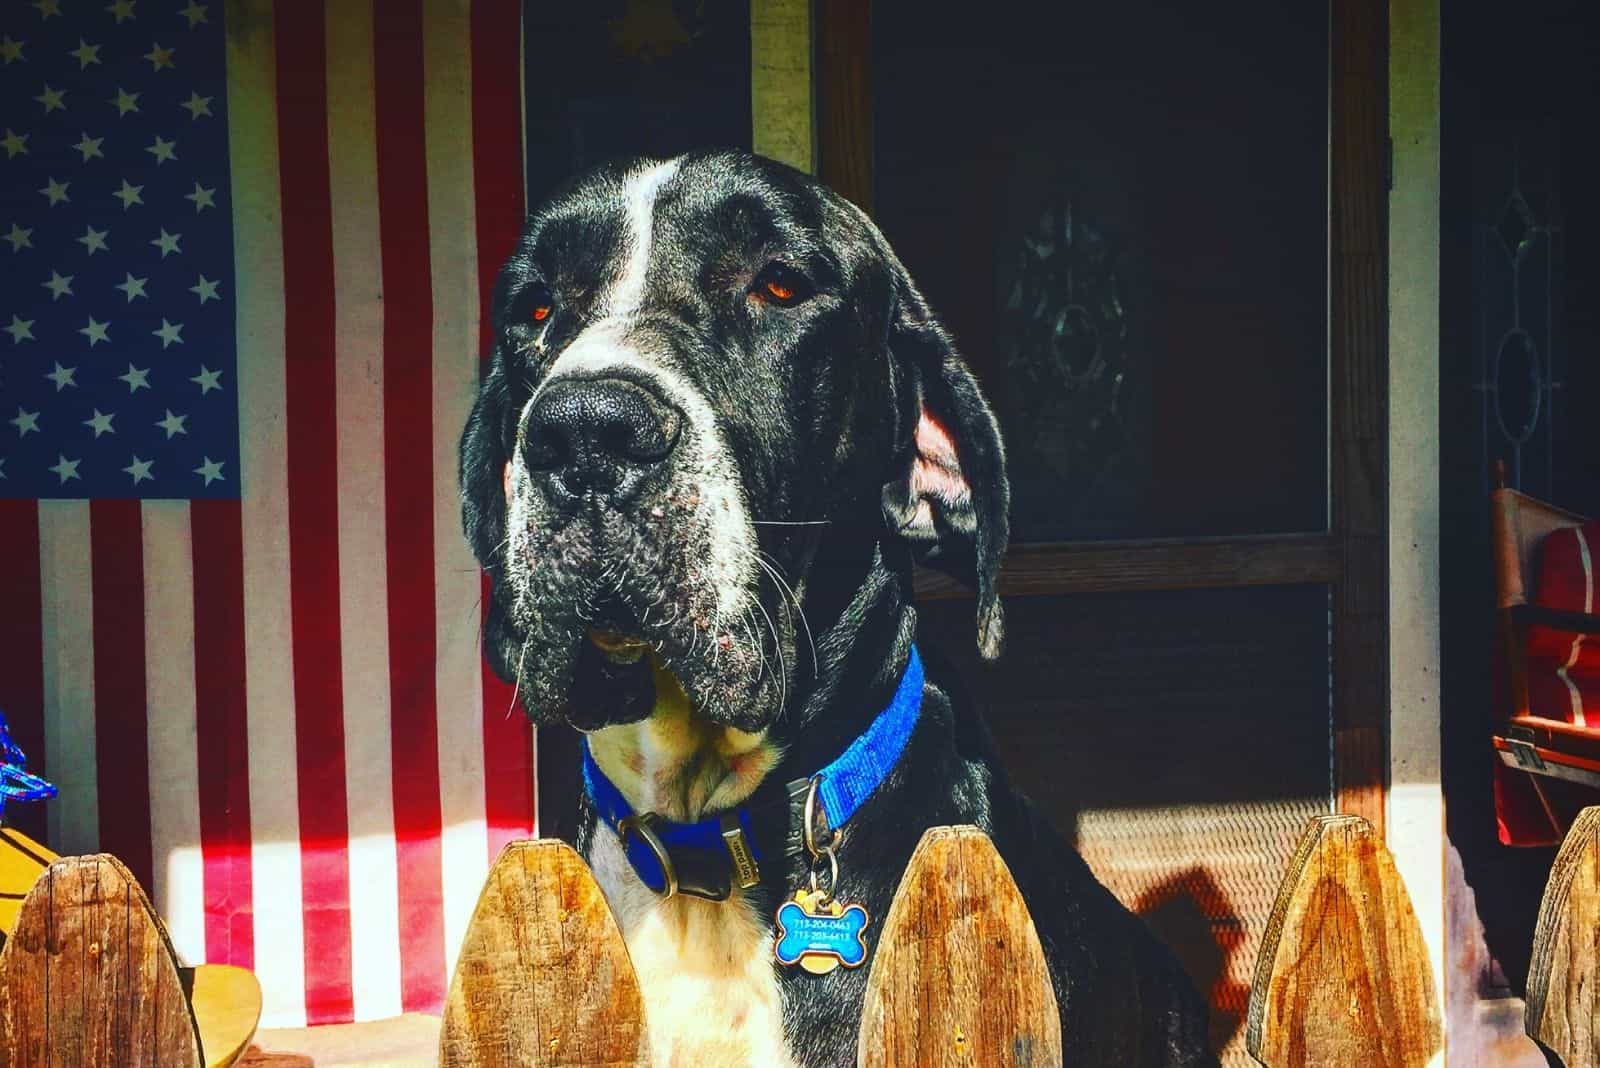 cane corso great dane mix standing behind the wooden fence outdoors